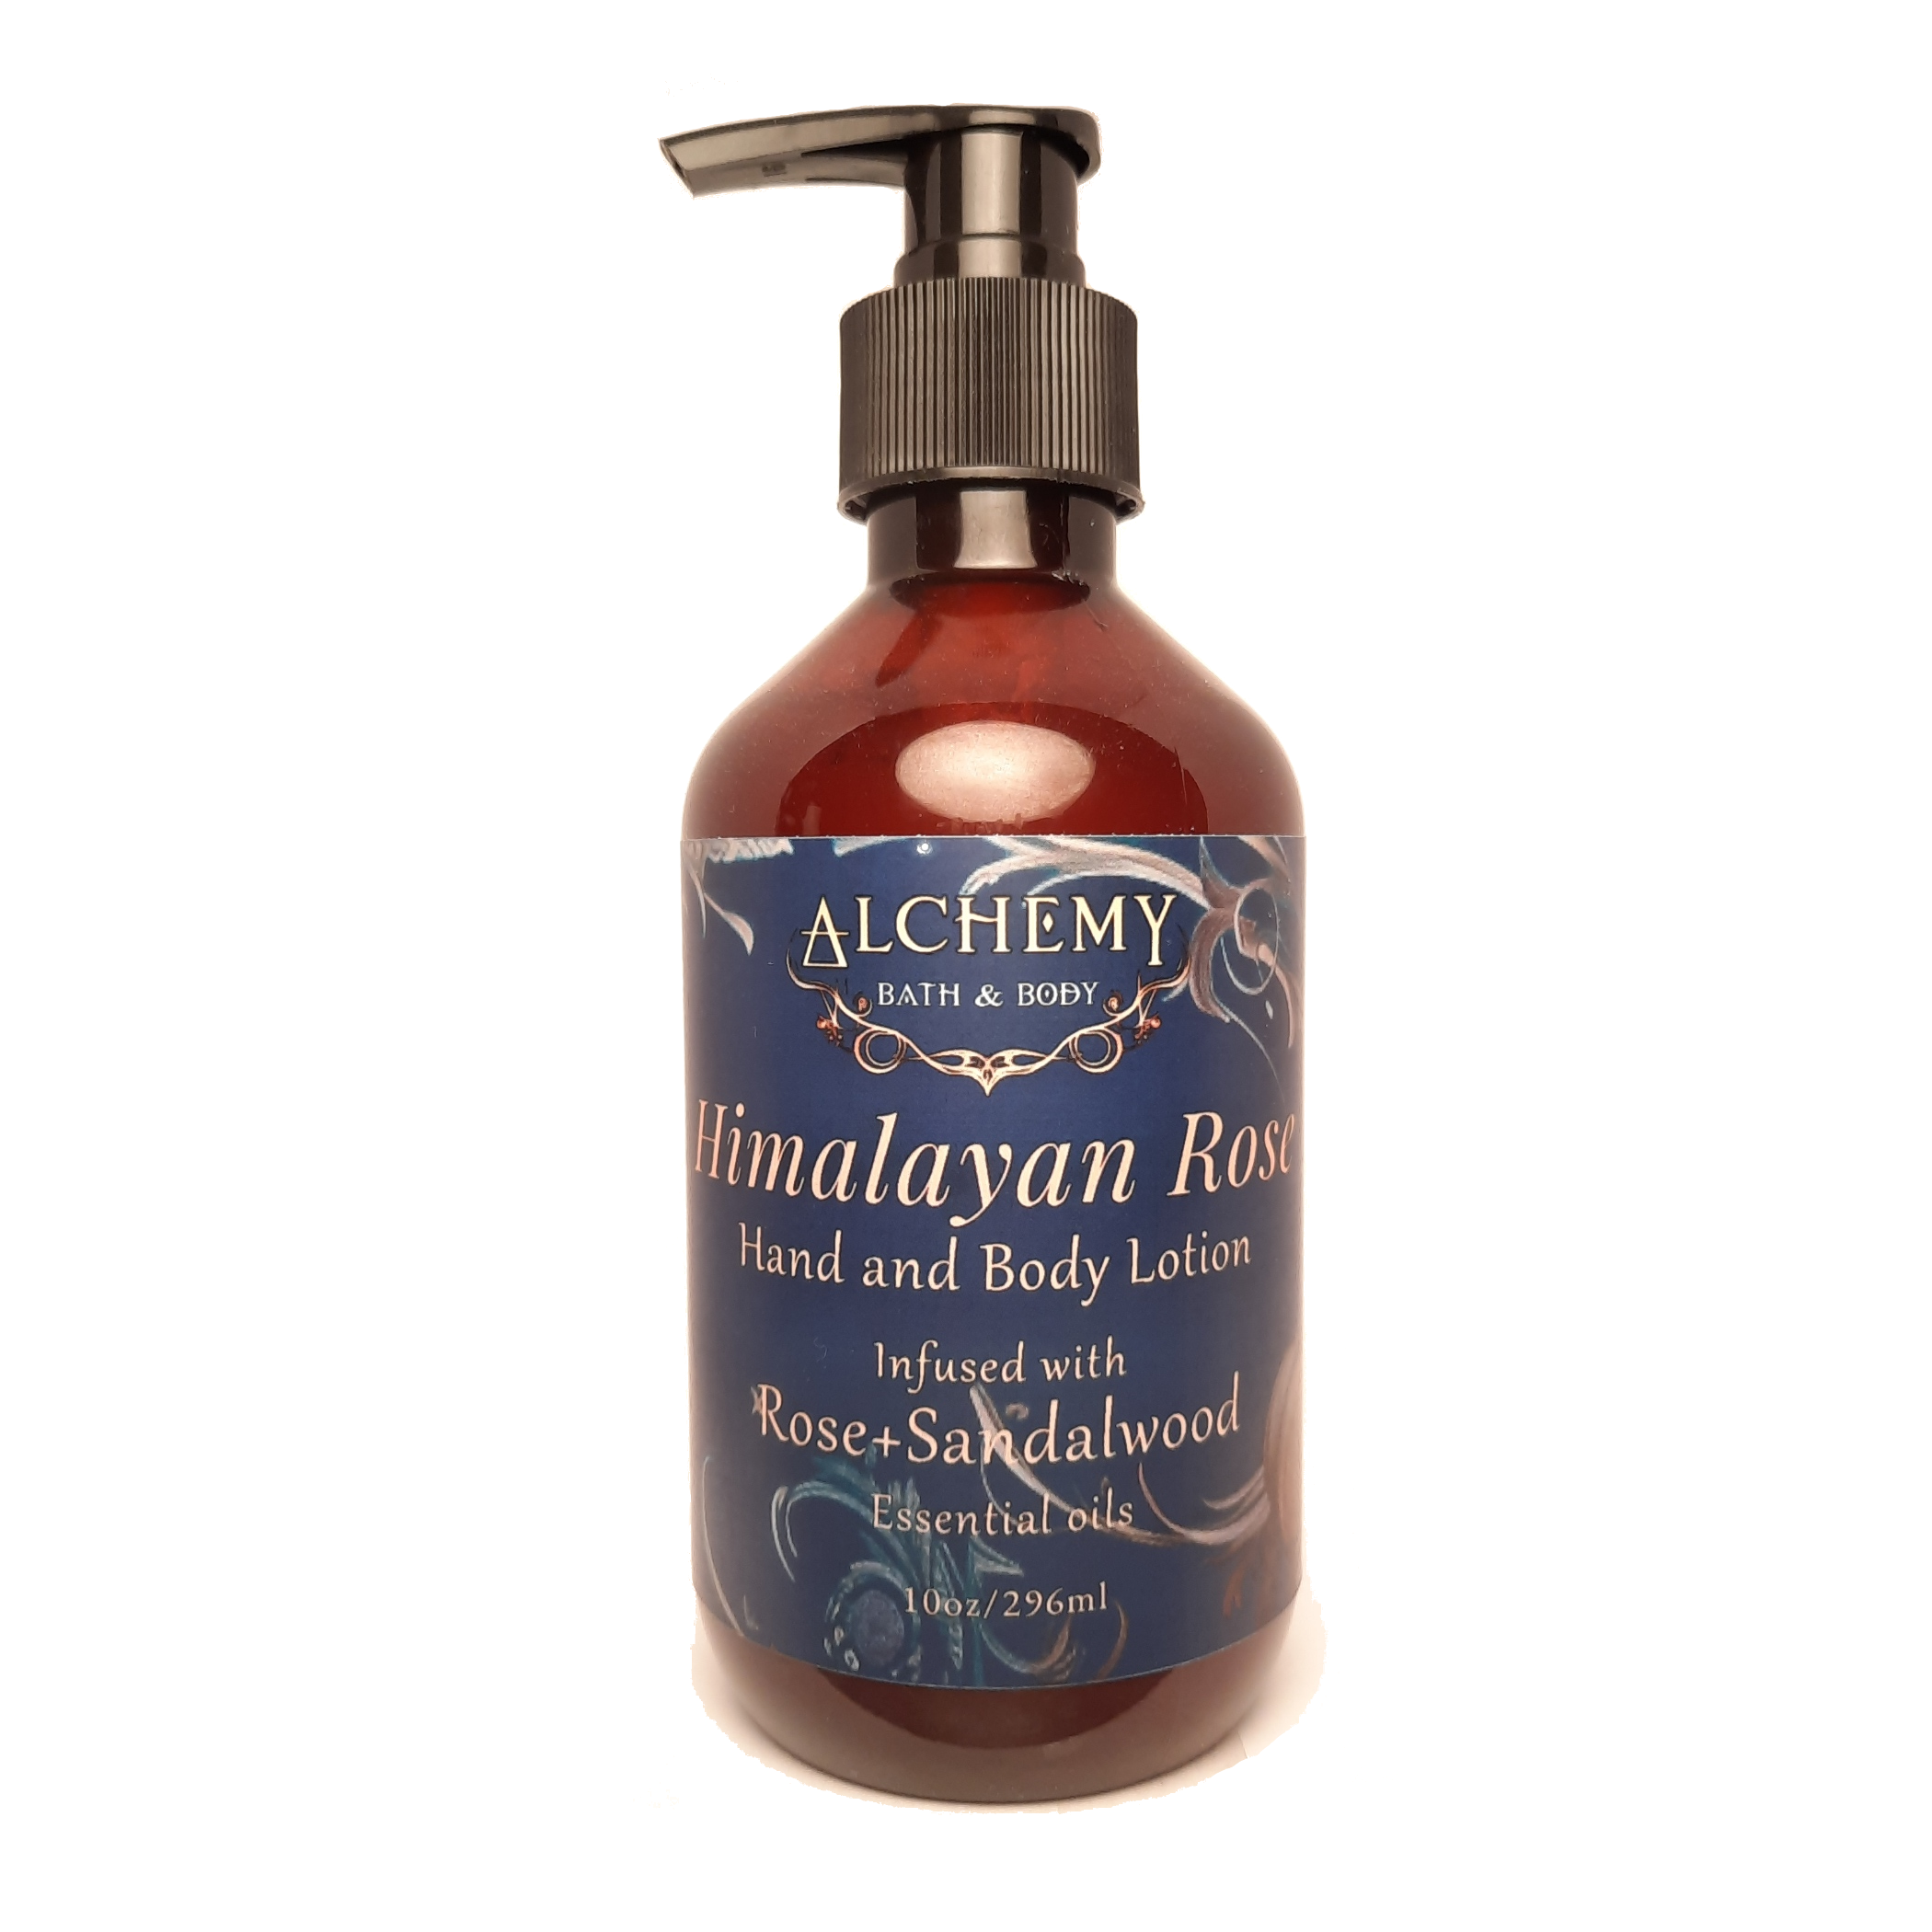 Himalayan Rose Hand and Body Lotion